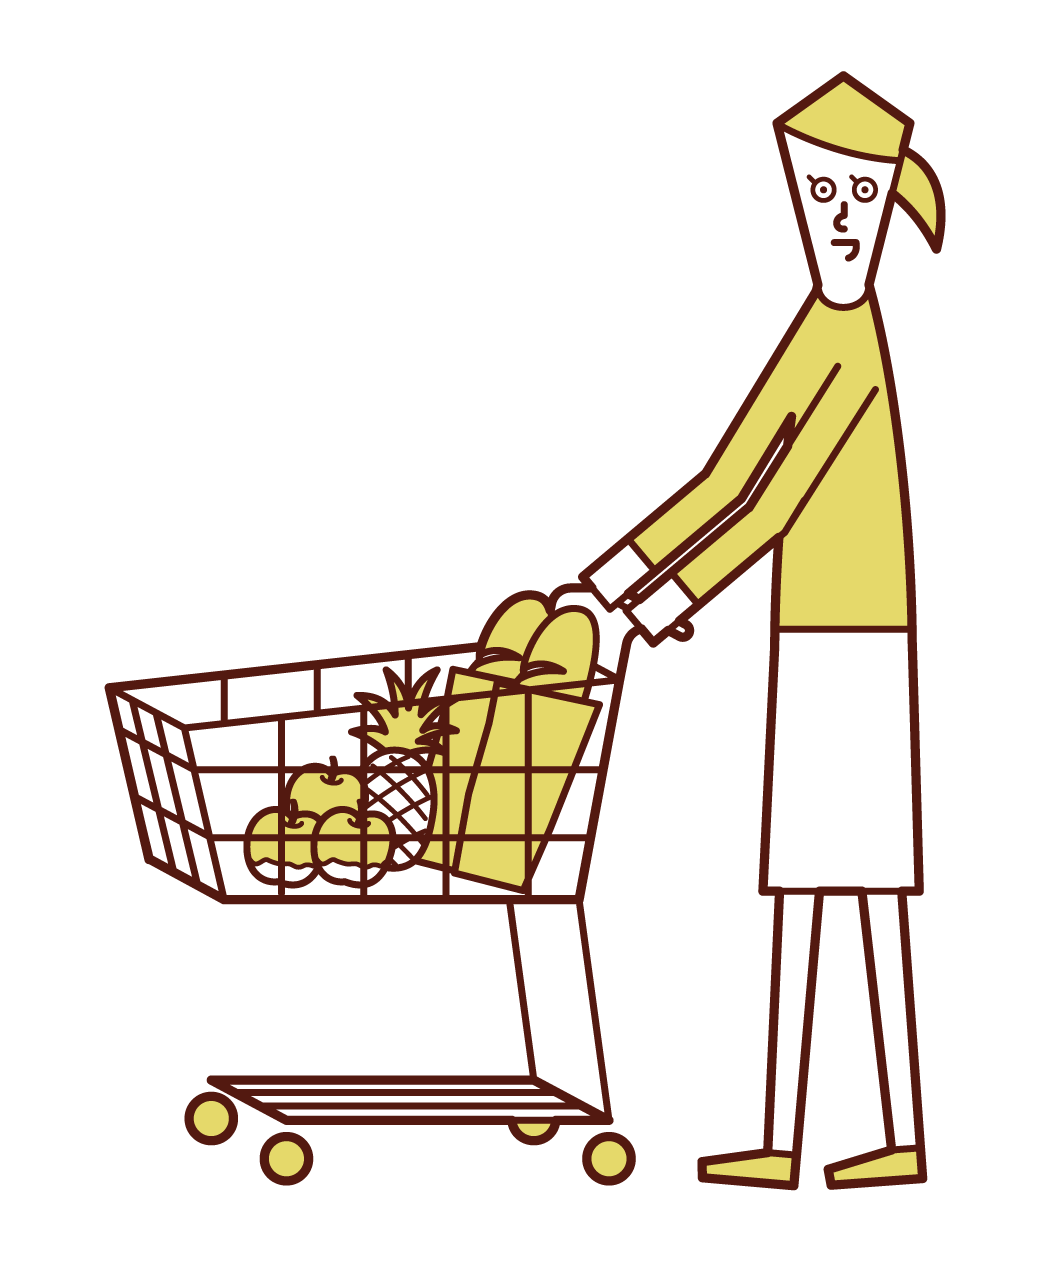 Illustration of a woman shopping in a supermarket